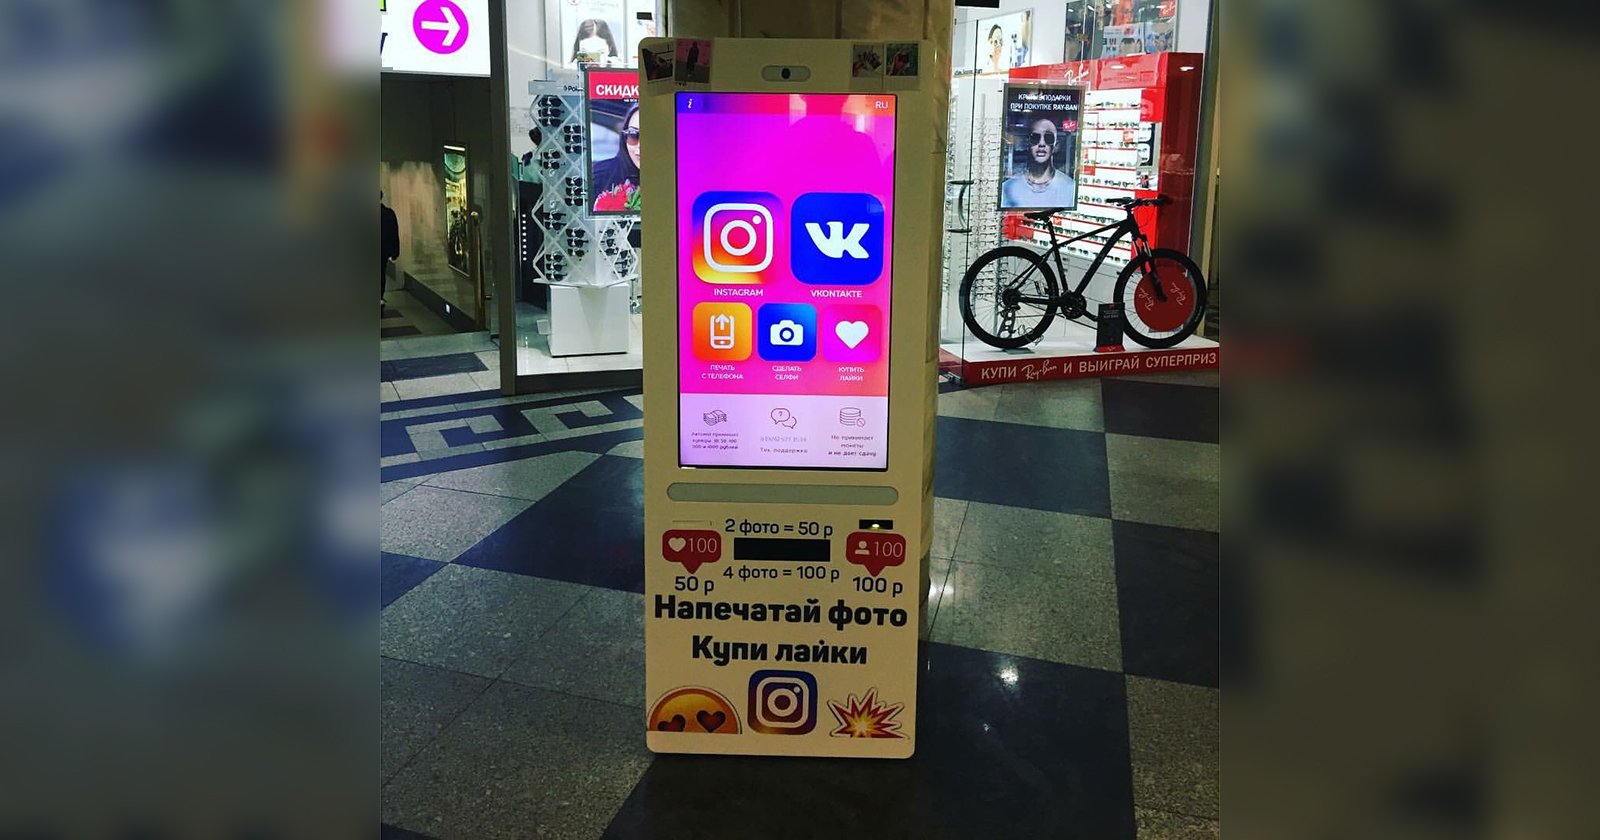 In Russia, You Can Use This Vending Machine to Buy Instagram Likes